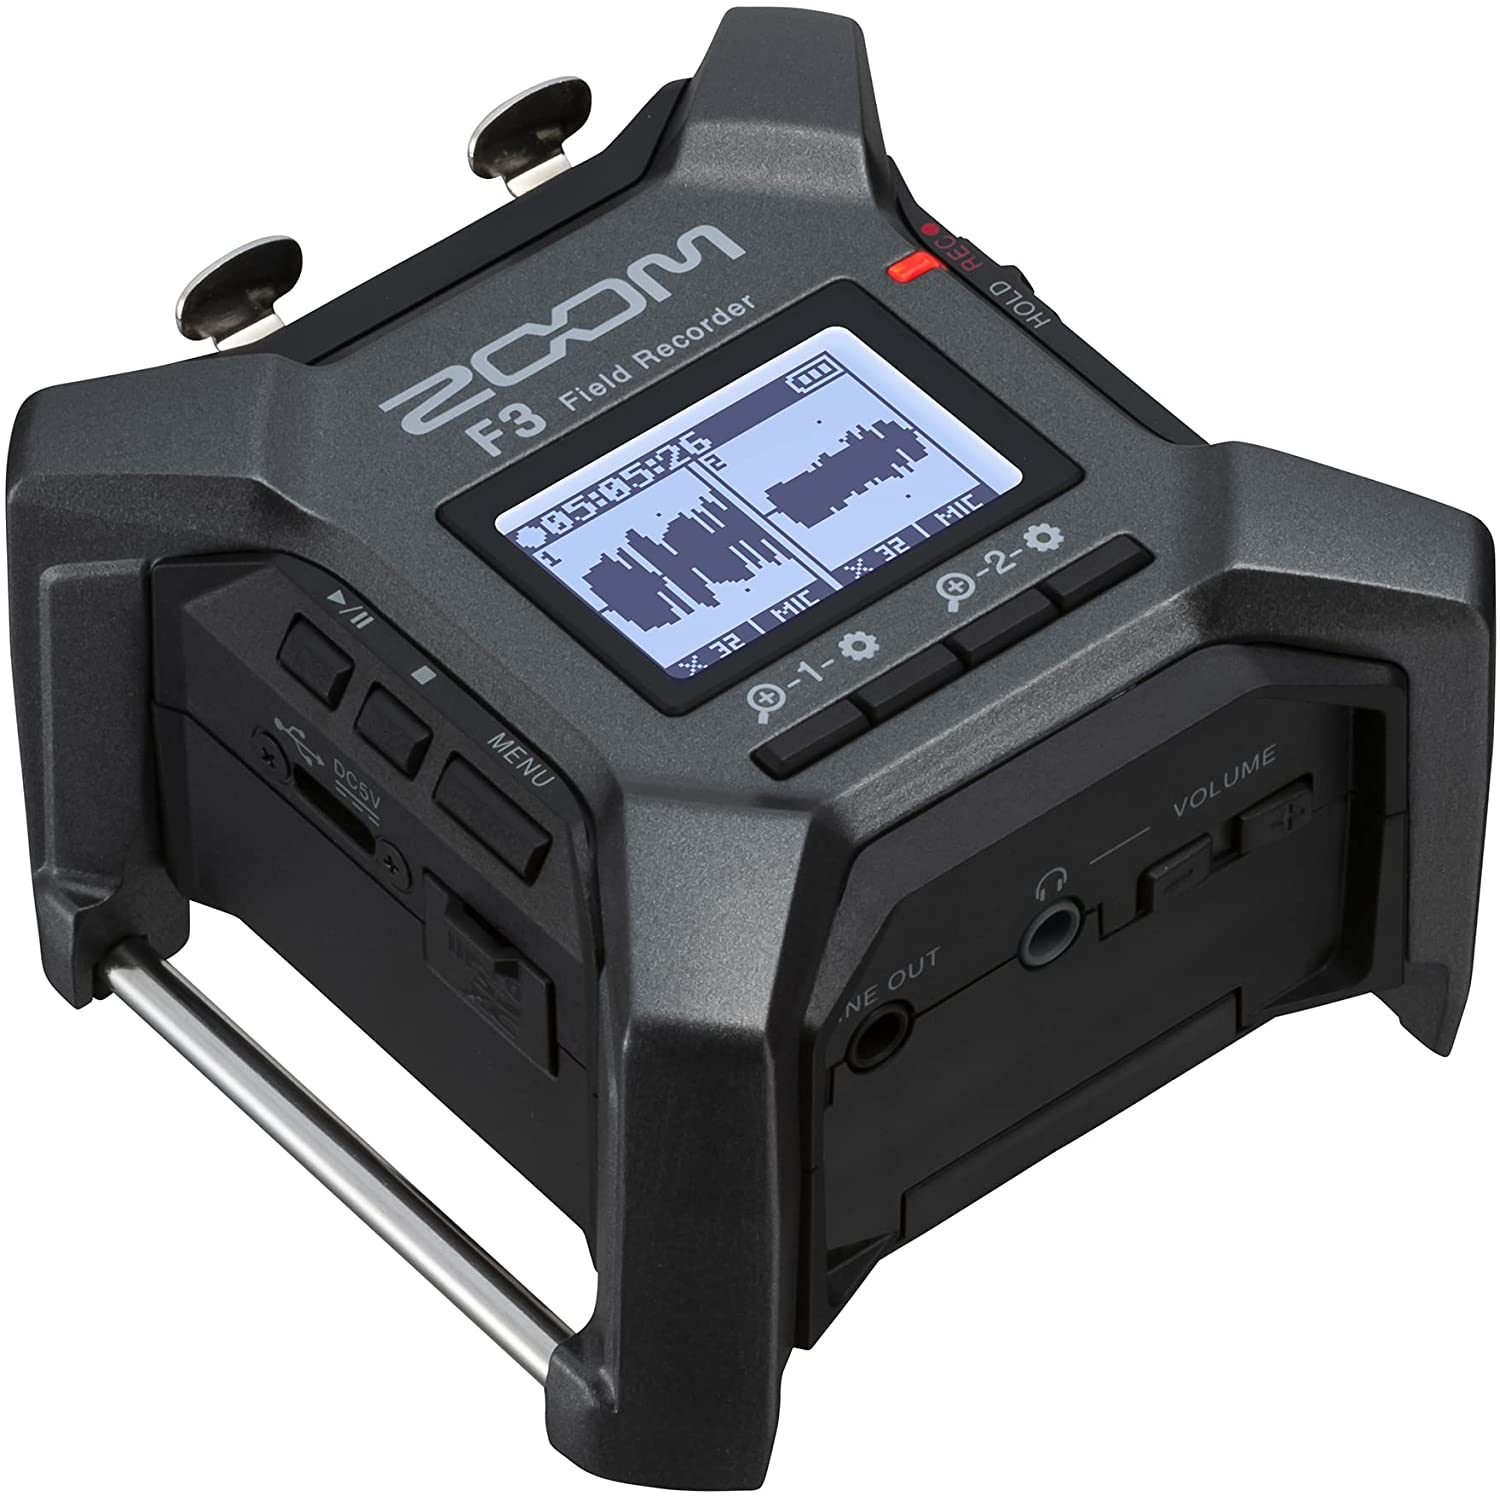 First look: Zoom F3 2-track 32-bit float recorder with 48 kHz sampling rate 7